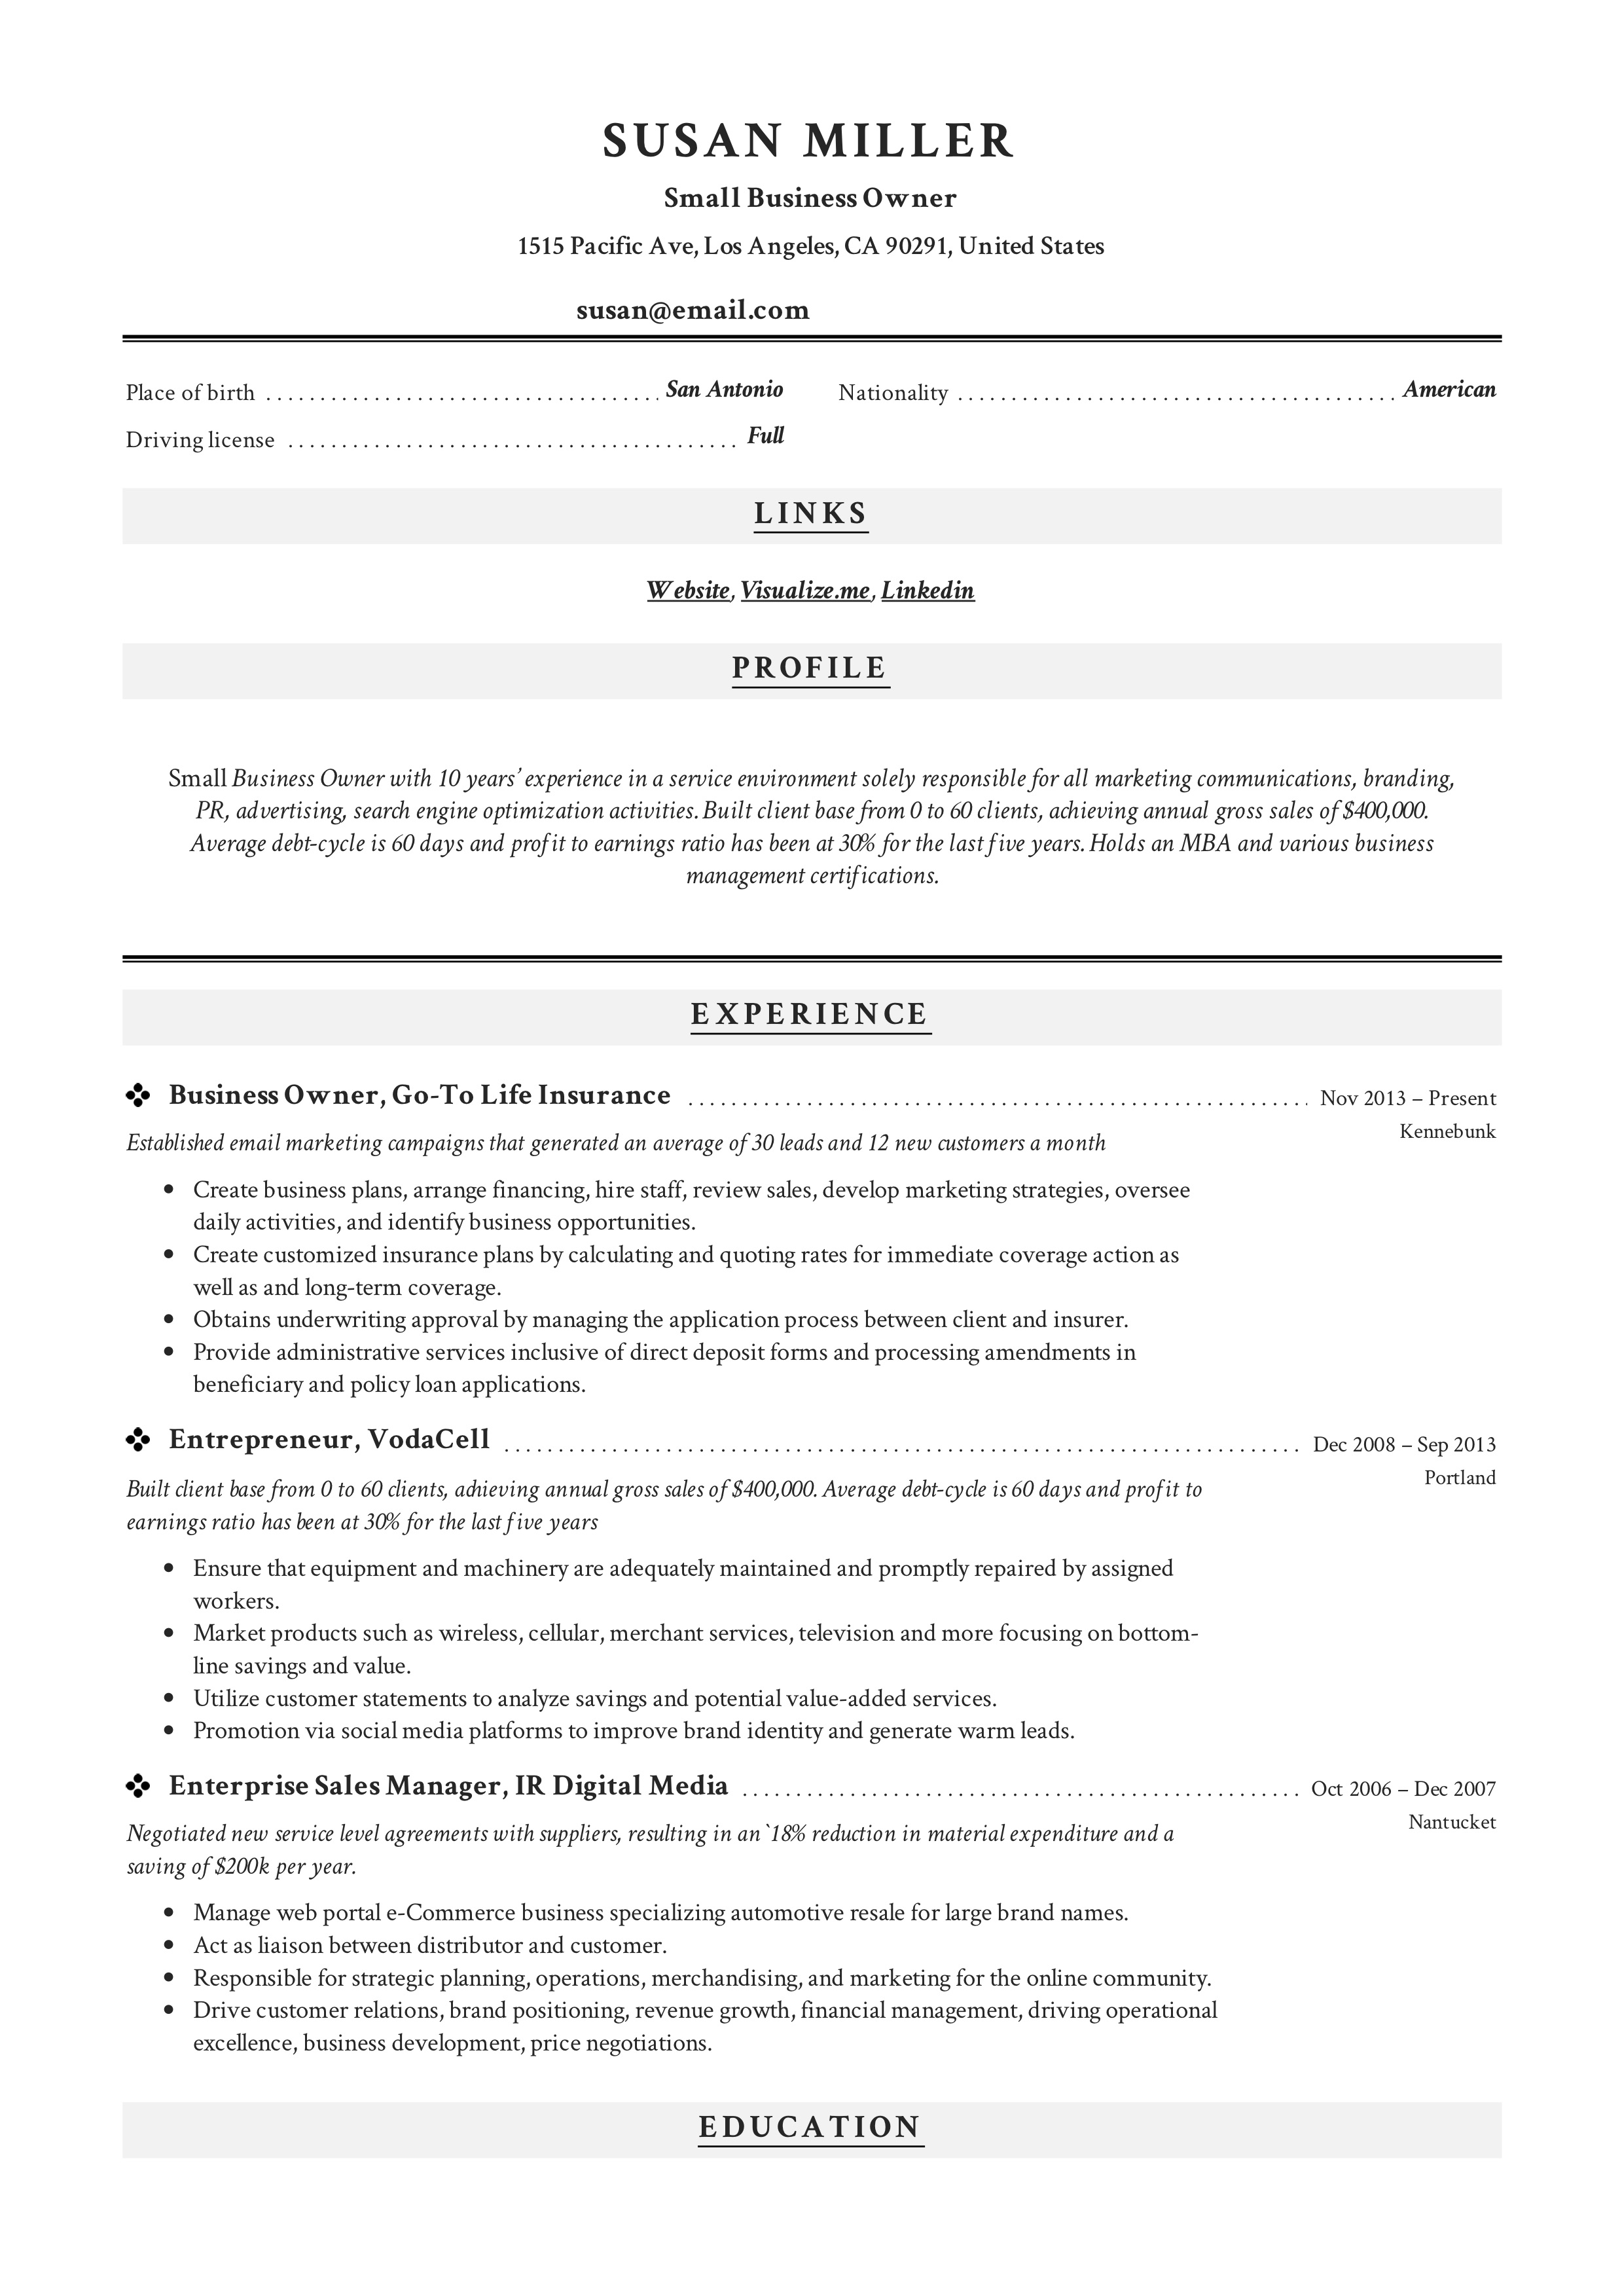 small business owner resume guide